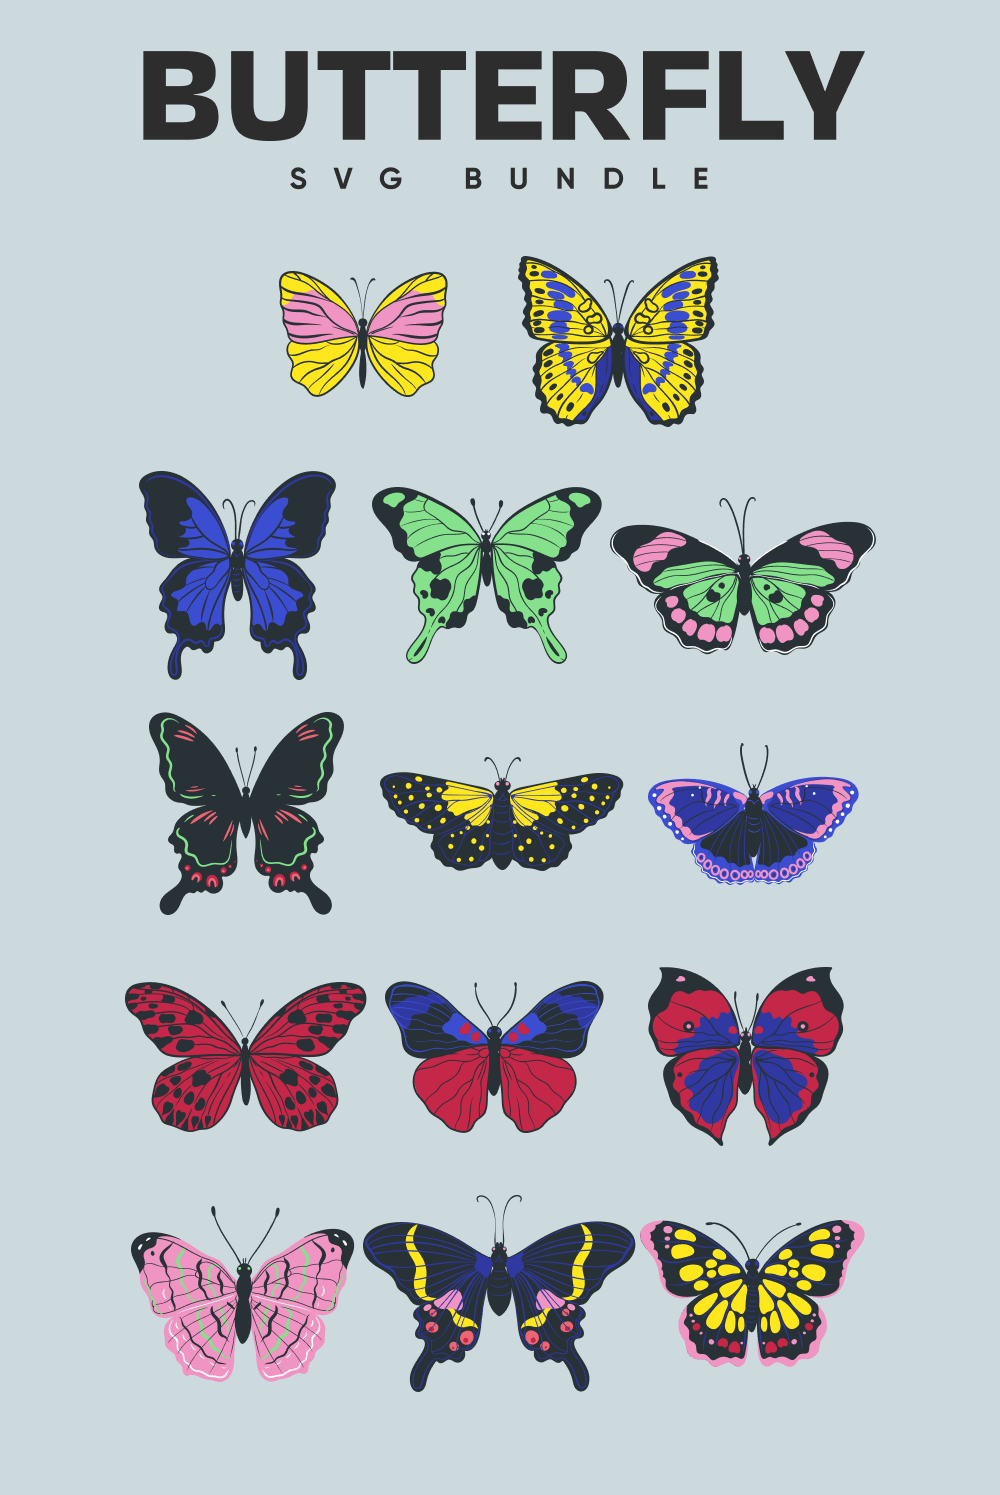 Bunch of butterflies with different colors on them.